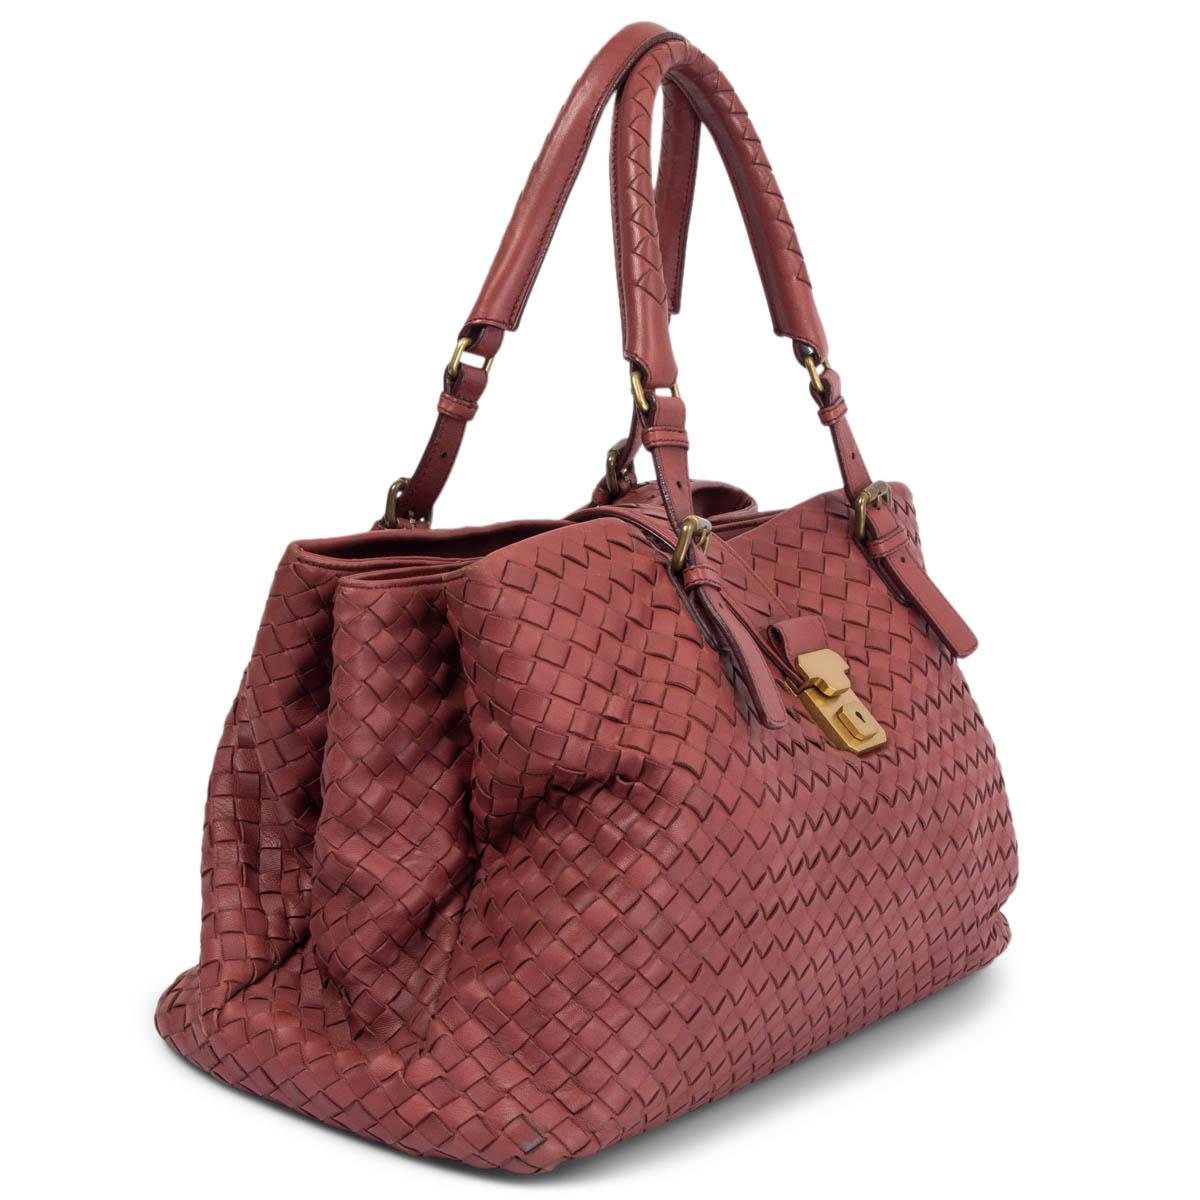 100% authentic Bottega Veneta Medium Roma Tote Bag in burgundy signature Intrecciato nappa leather. Featuring round top handles and a fold-over top with gold-tone push-lock closure. Interior is divided in three compartments. Lined in pale coral